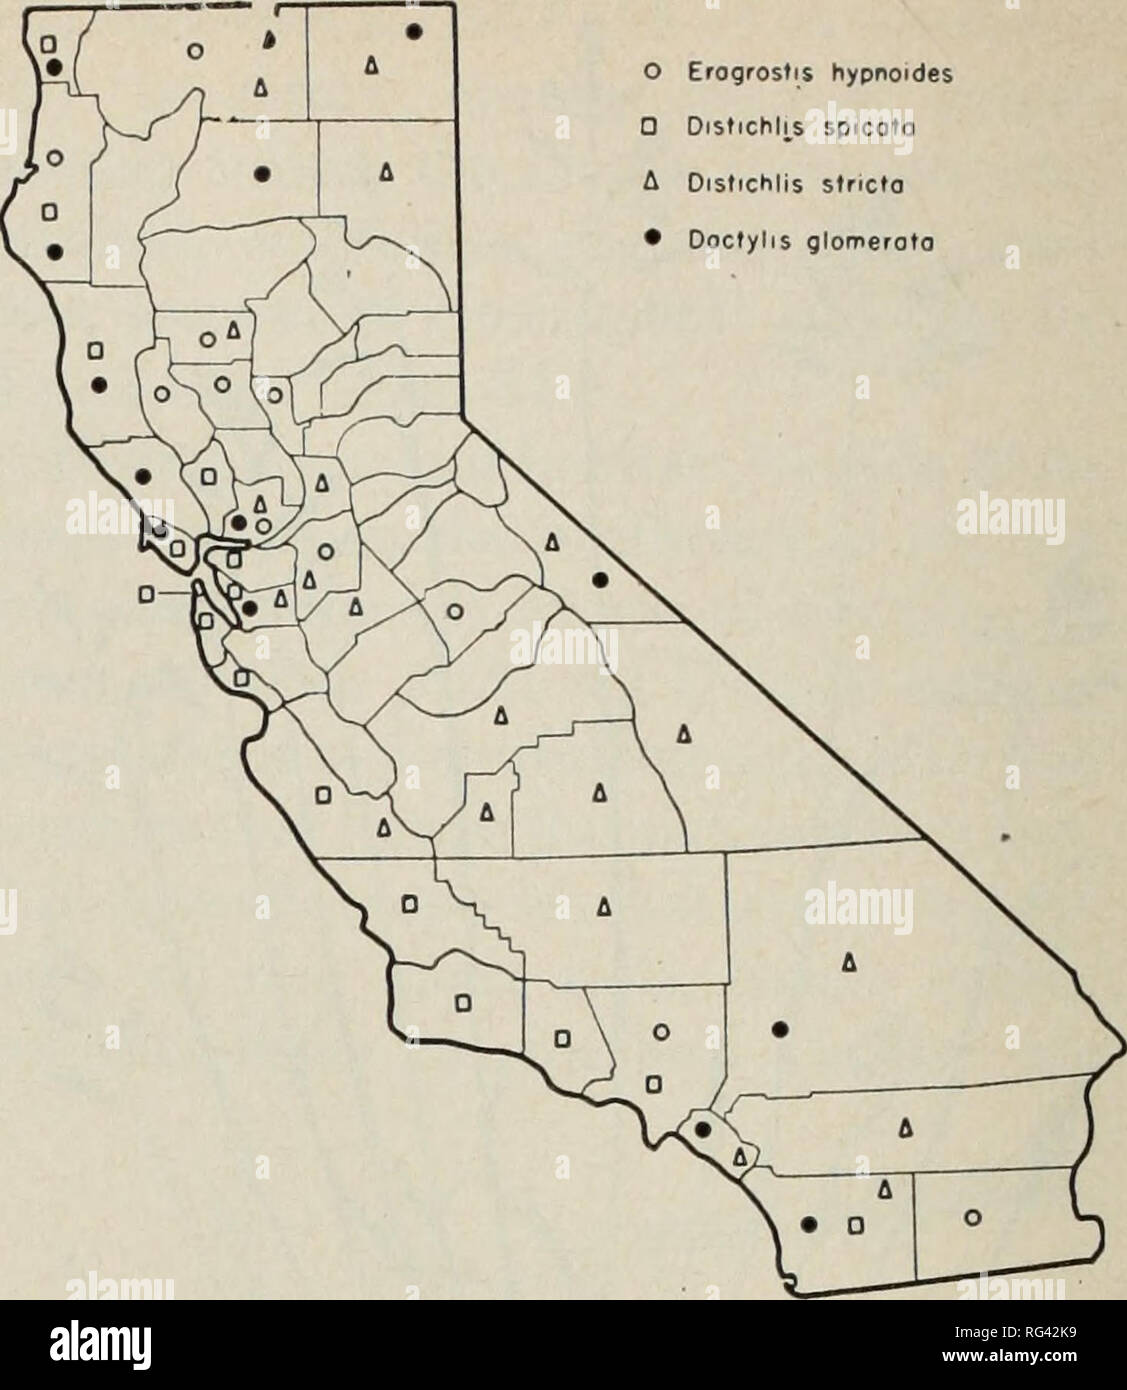 . California grasslands and range forage grasses. Grasses; Forage plants. Fig. 36. Desert saltgrass (Distichlis stricta). Fig. 37. Distribution of creeping lovegrass (Eragrostis hypnoides), saltgrasses (Distichlis spp.), and orchardgrass (Dactylis glomerata). closely. They also graze the foliage when other sources of forage have dried or matured. 2. SALTGRASS (Distichlis spicata) is 10 to 30, sometimes 40, cm tall, mostly some- what stouter than desert saltgrass; pan- icle pale or greenish. The forage value of saltgrass is similar to that of desert saltgrass. 5. MELICGRASSES (MEUCA) Melicgrass Stock Photo